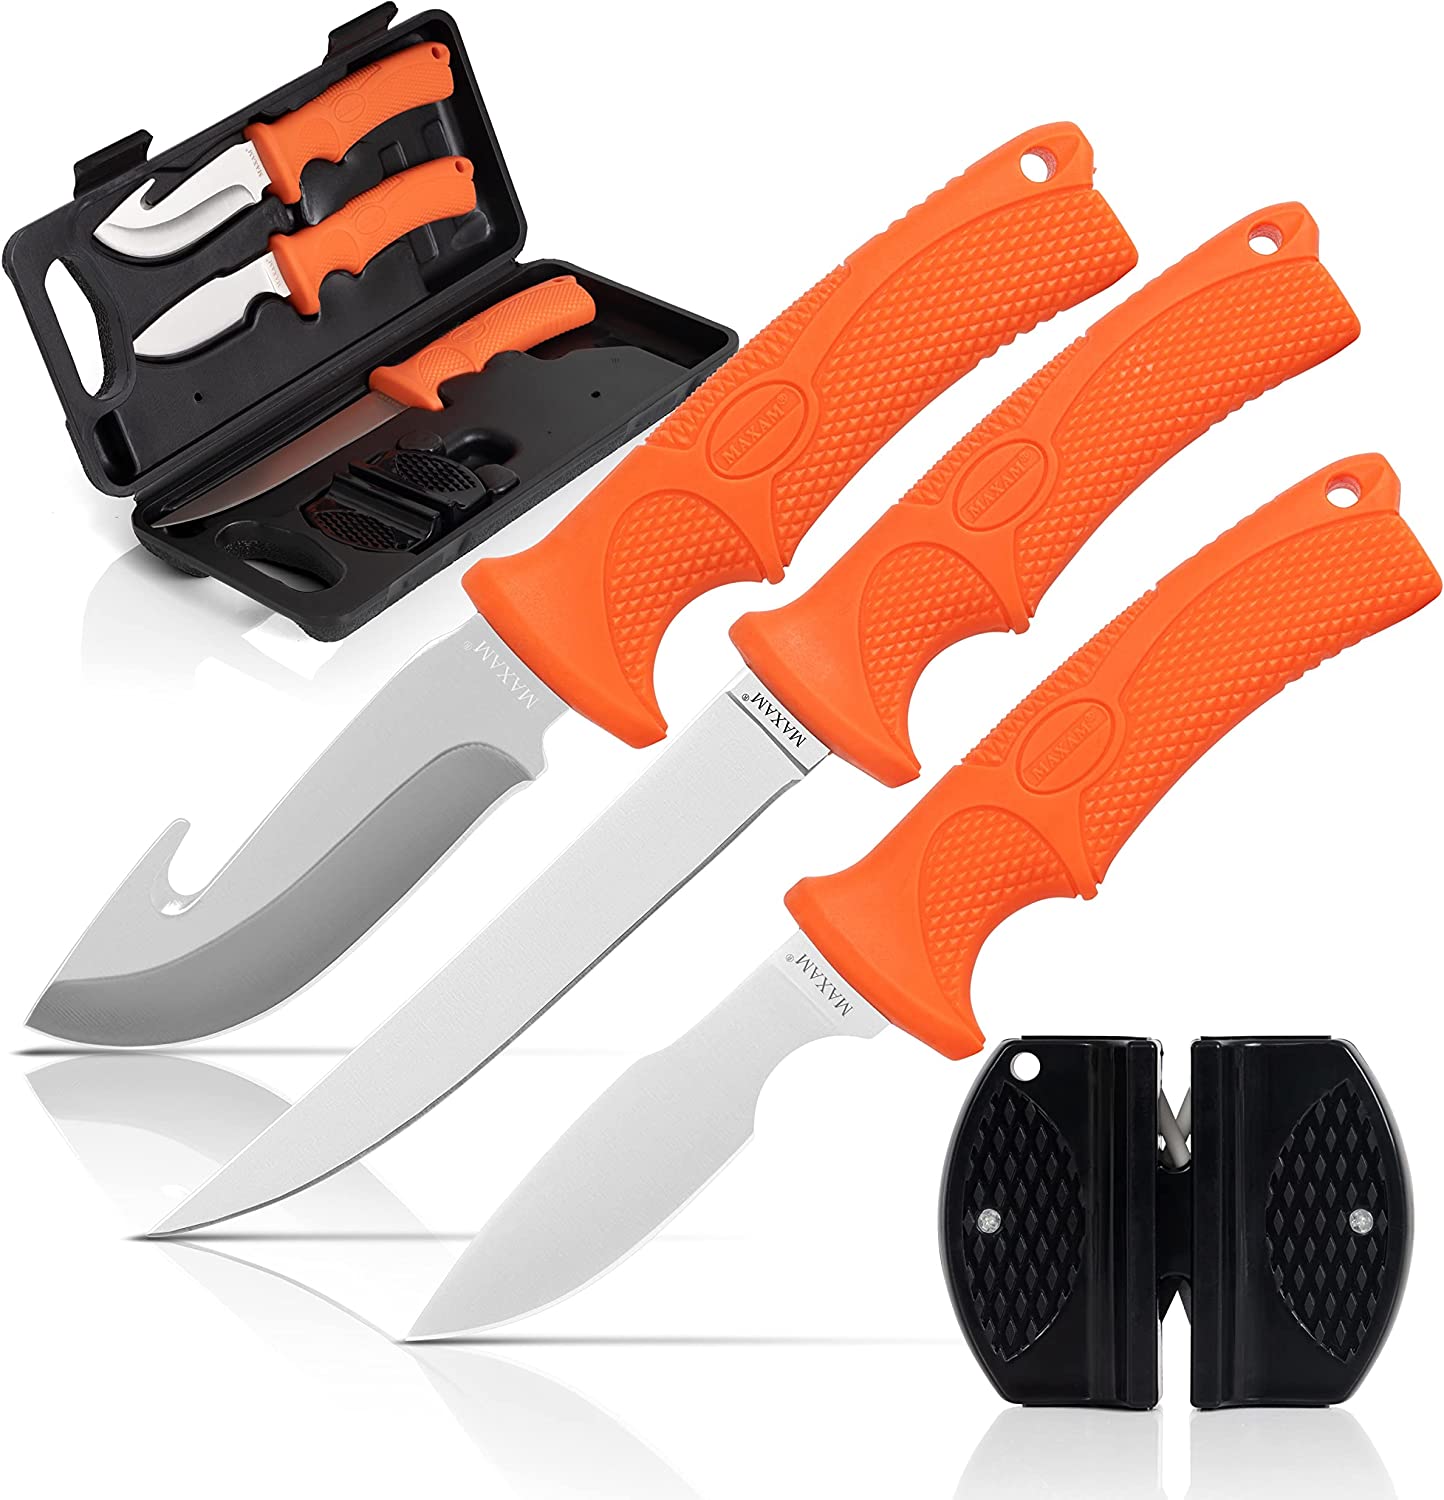 Maxam 5-Piece Fixed Blade Skinning Knife Set – Stainless Steel Dressing Tools with Orange Handles – 8.75" Skinning Knife, 8.75" Caping Knife, 10.5" Boning Knife, Storage Case, Double-Sided Sharpener